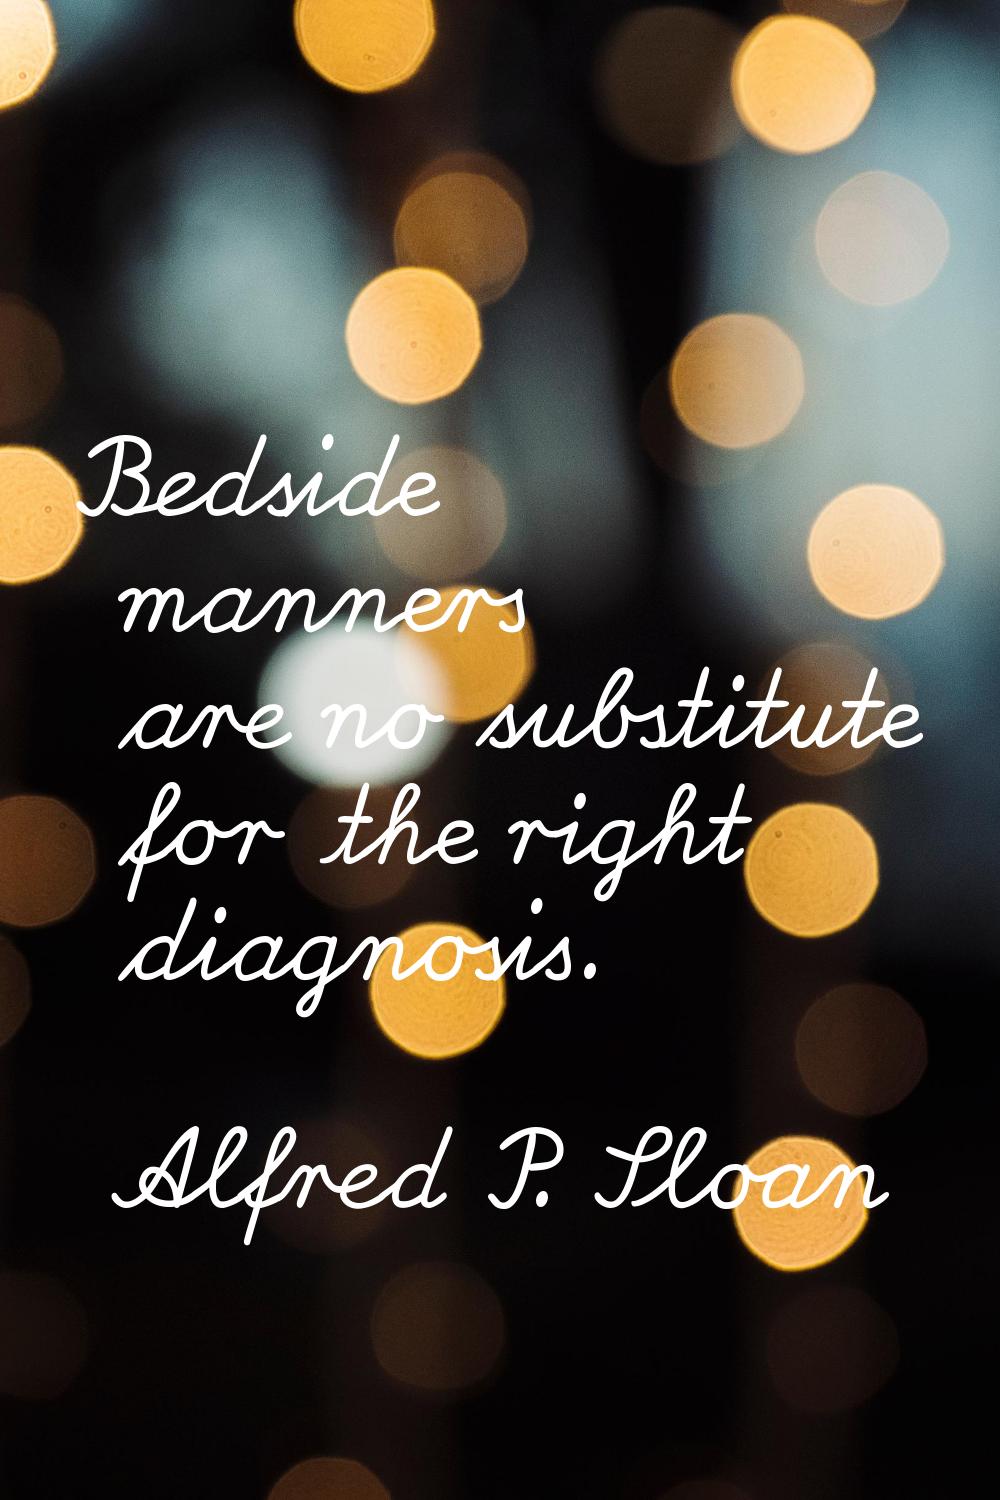 Bedside manners are no substitute for the right diagnosis.